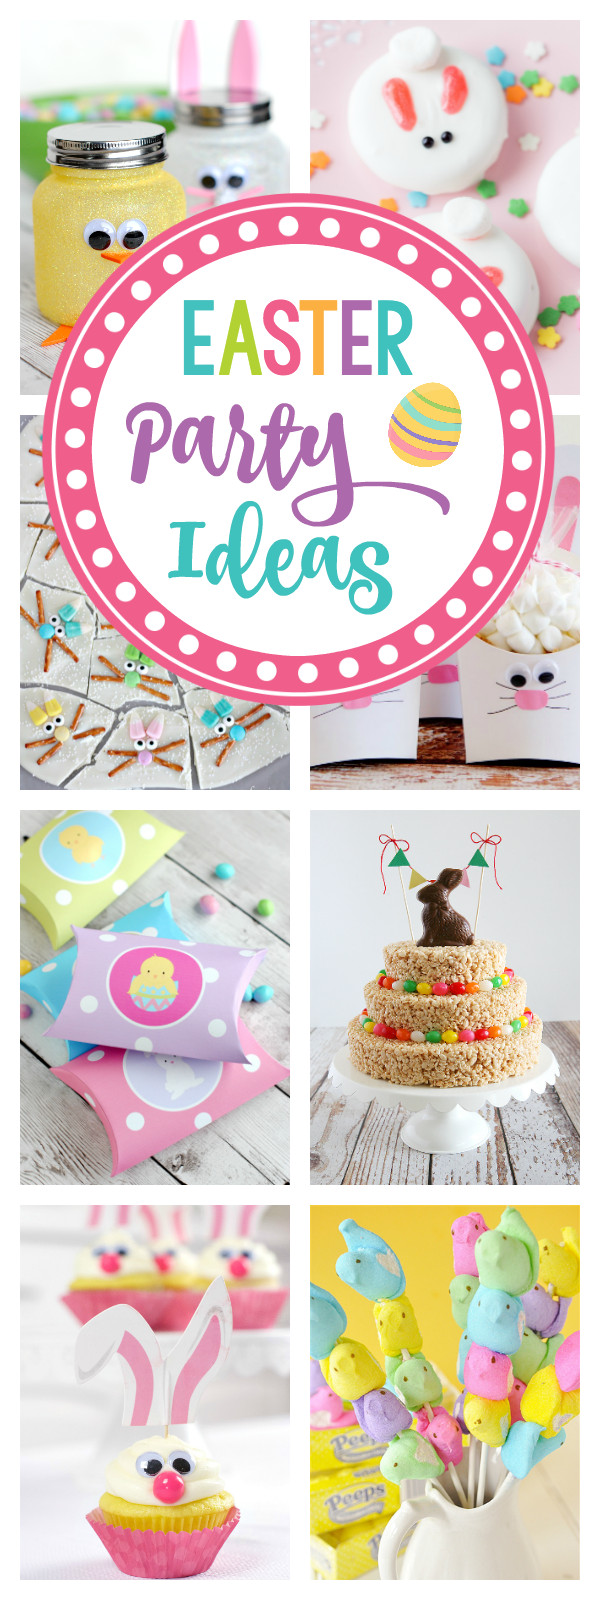 Easter Party Ideas Children
 25 Fun Easter Party Ideas for Kids – Fun Squared